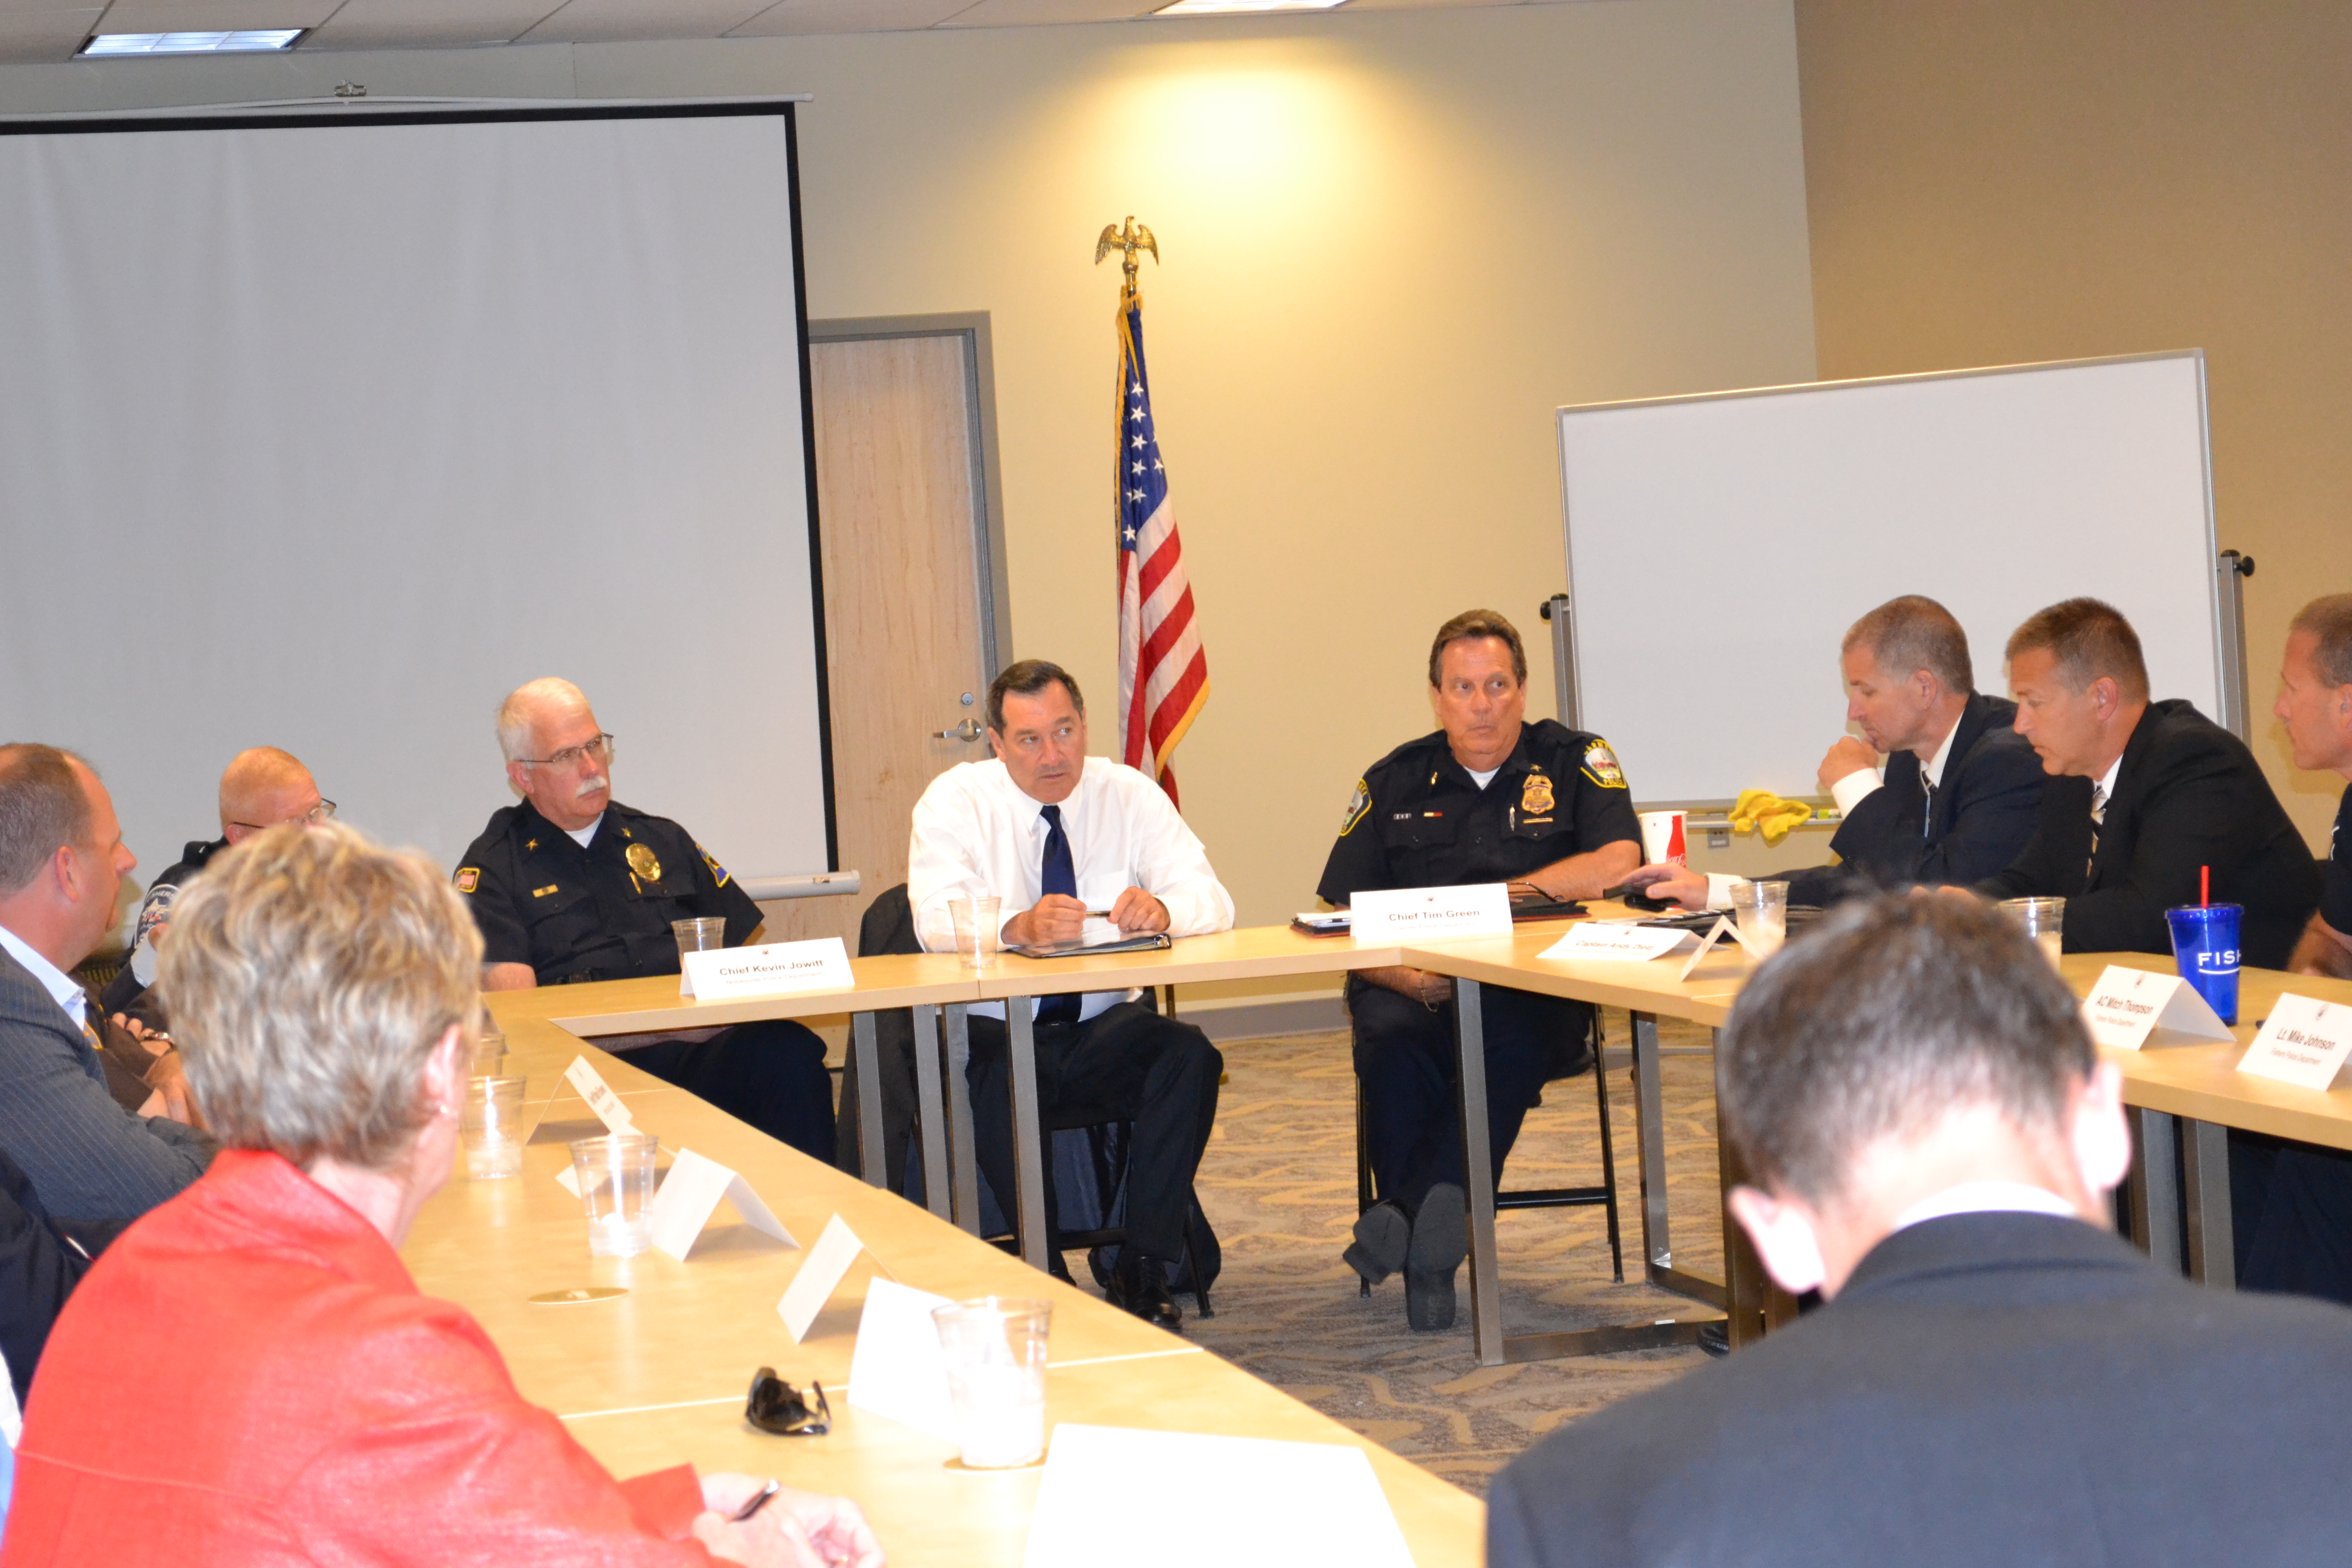 Indiana Senator Joe Donnelly held a meeting with law enforcement agencies from Hamilton and Boone Counties at Launch Fishers May 27 to discuss drug problems in the counties. (Photo by Ann Craig-Cinnamon)